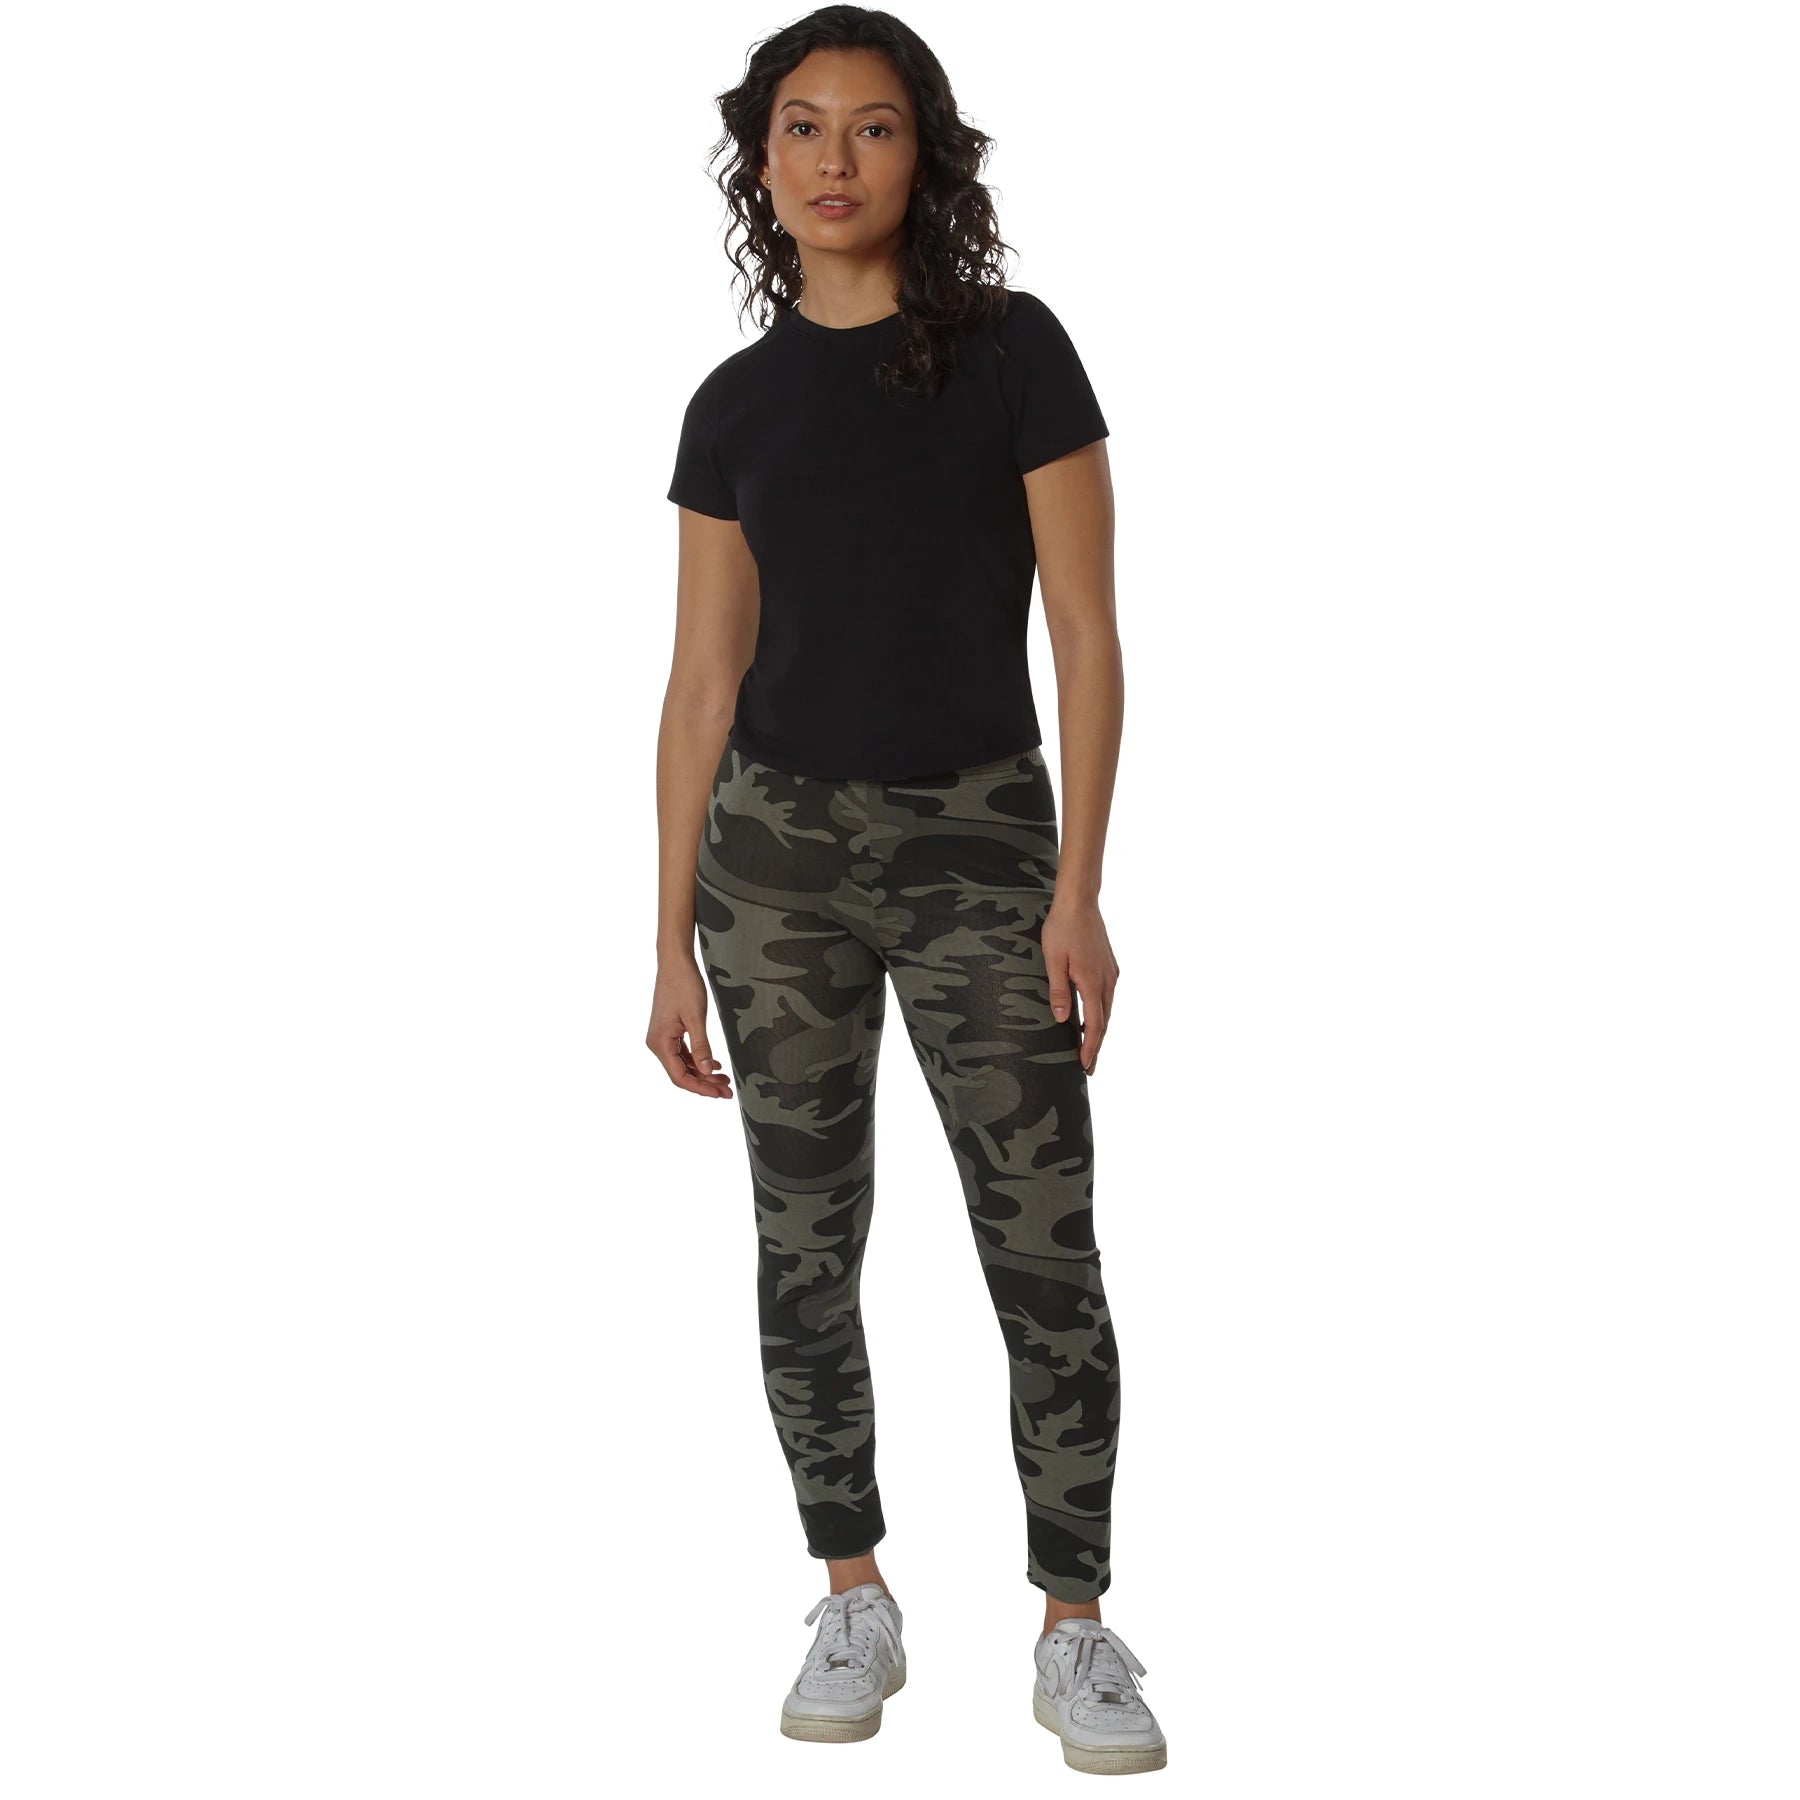 Rothco  Women's Workout Performance Black Camo Leggings with